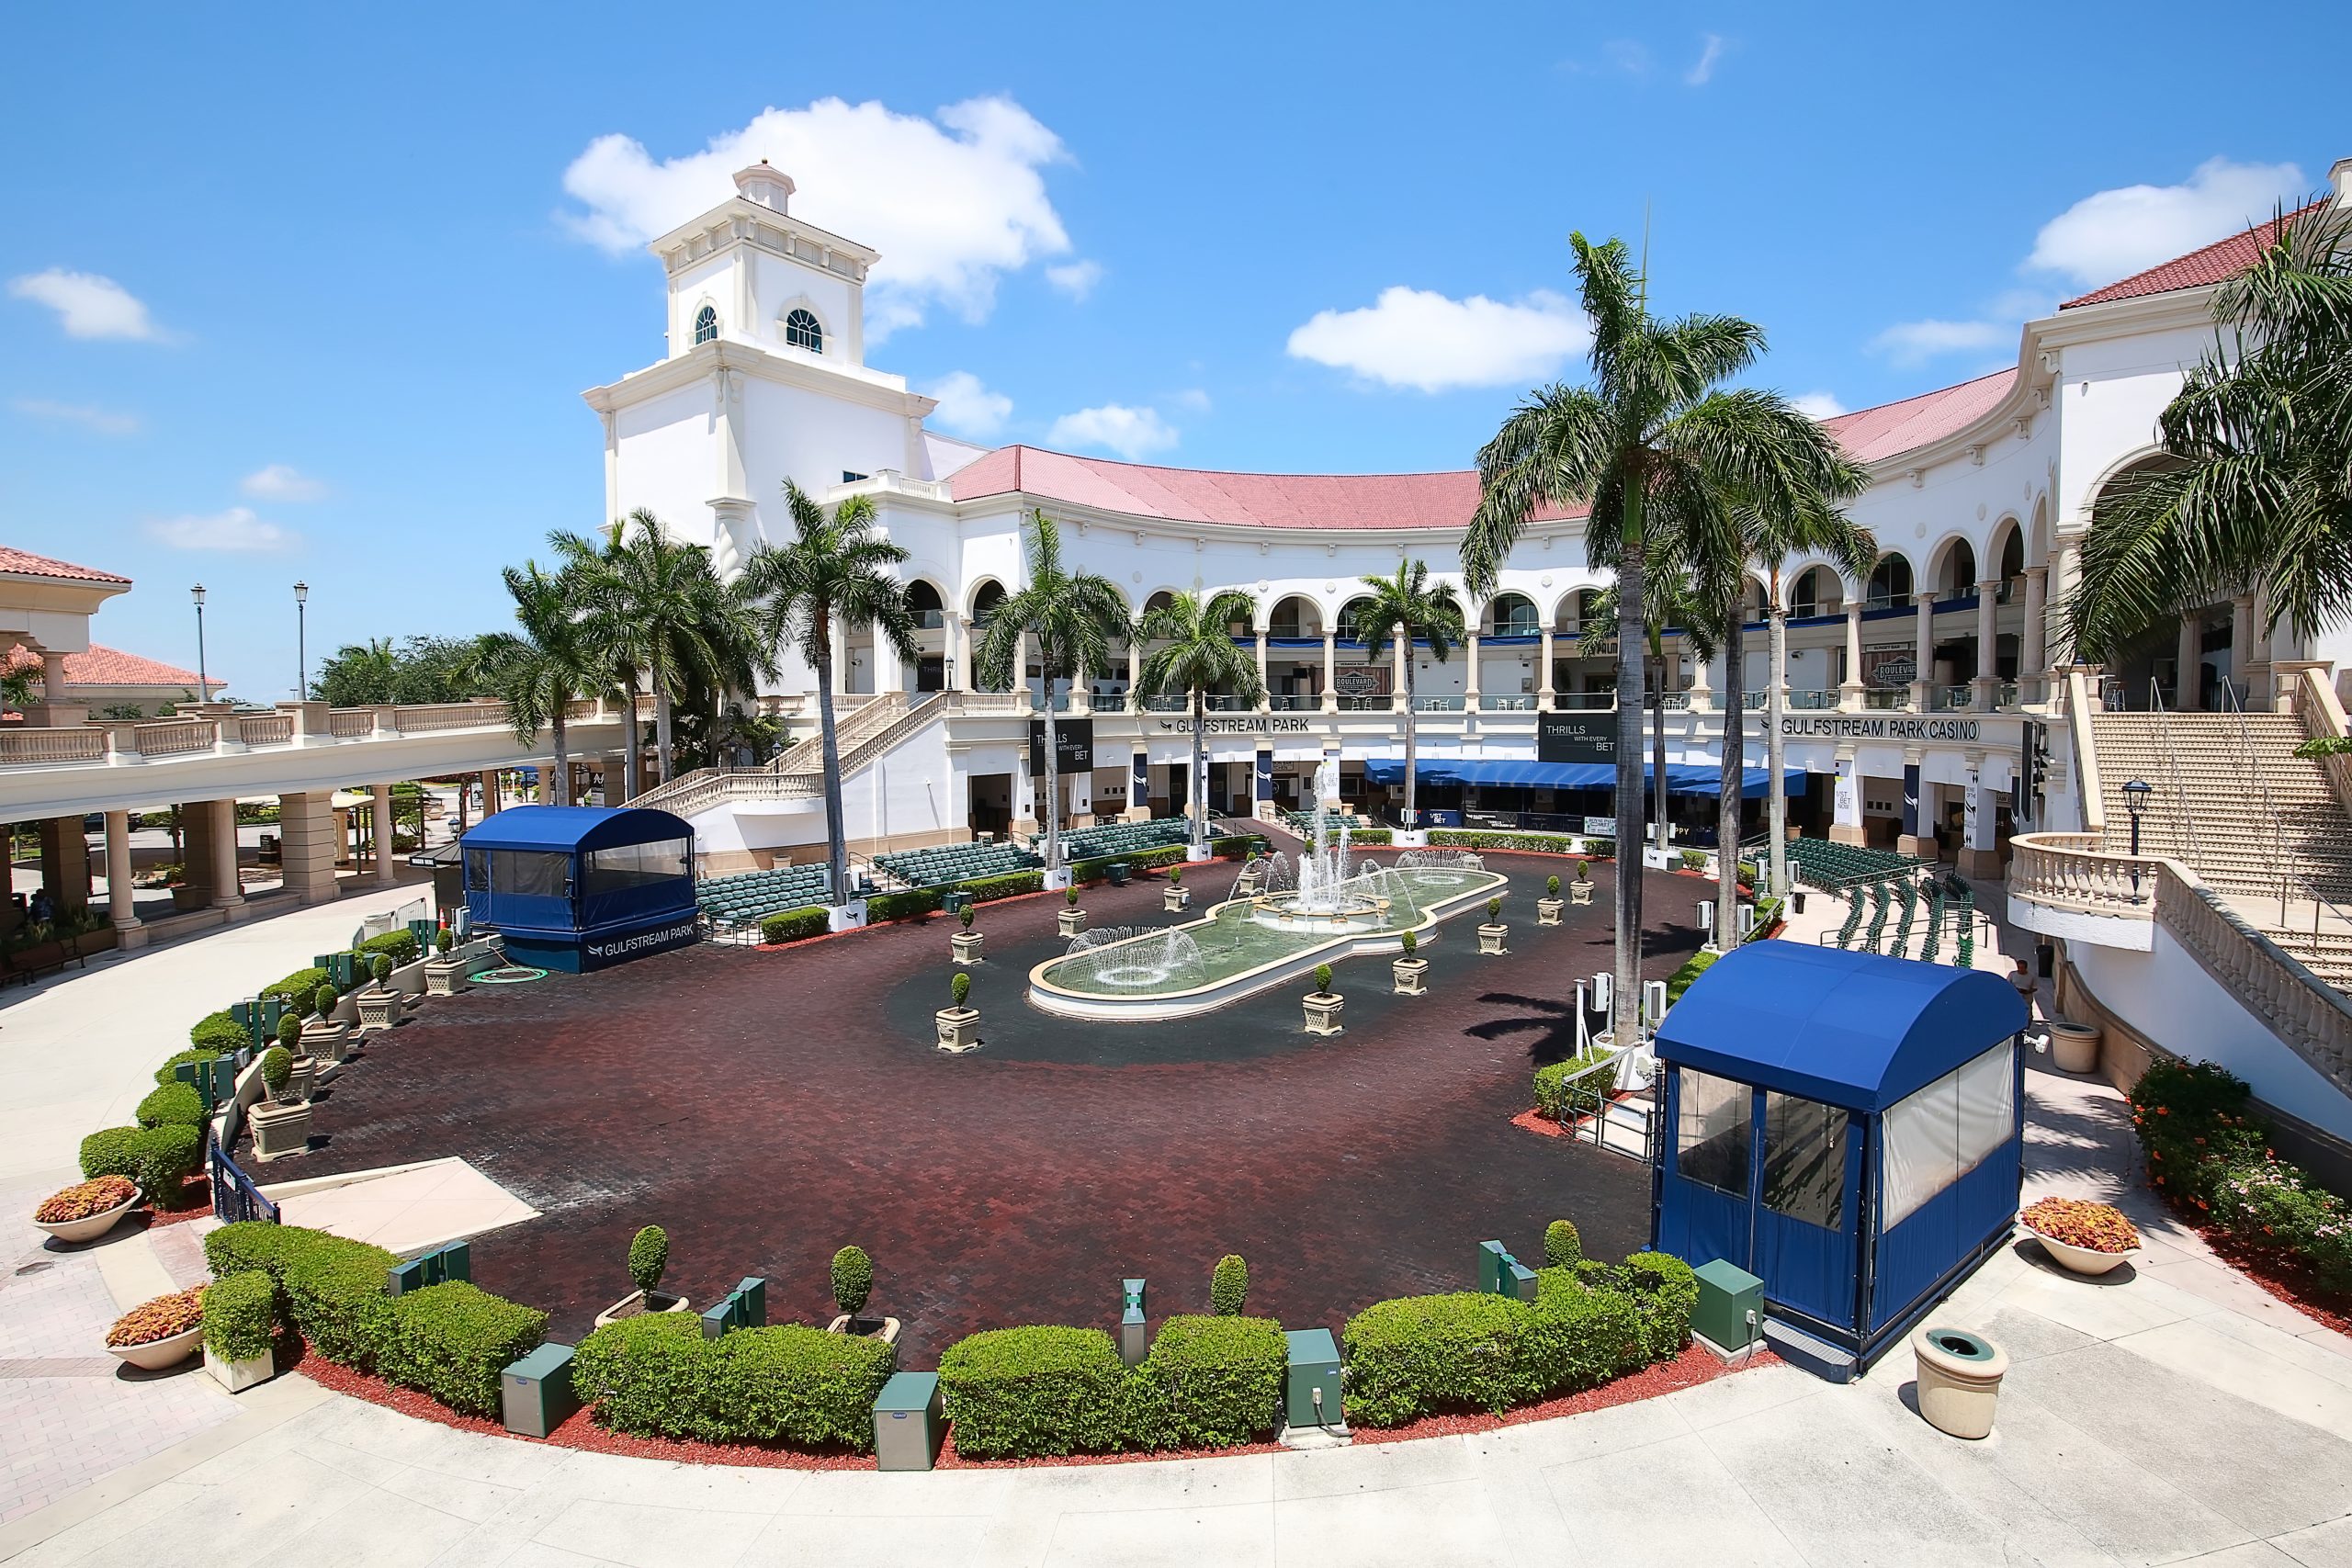 Gulfstream Park Horse Racing, Gaming and Shopping Complex, locat